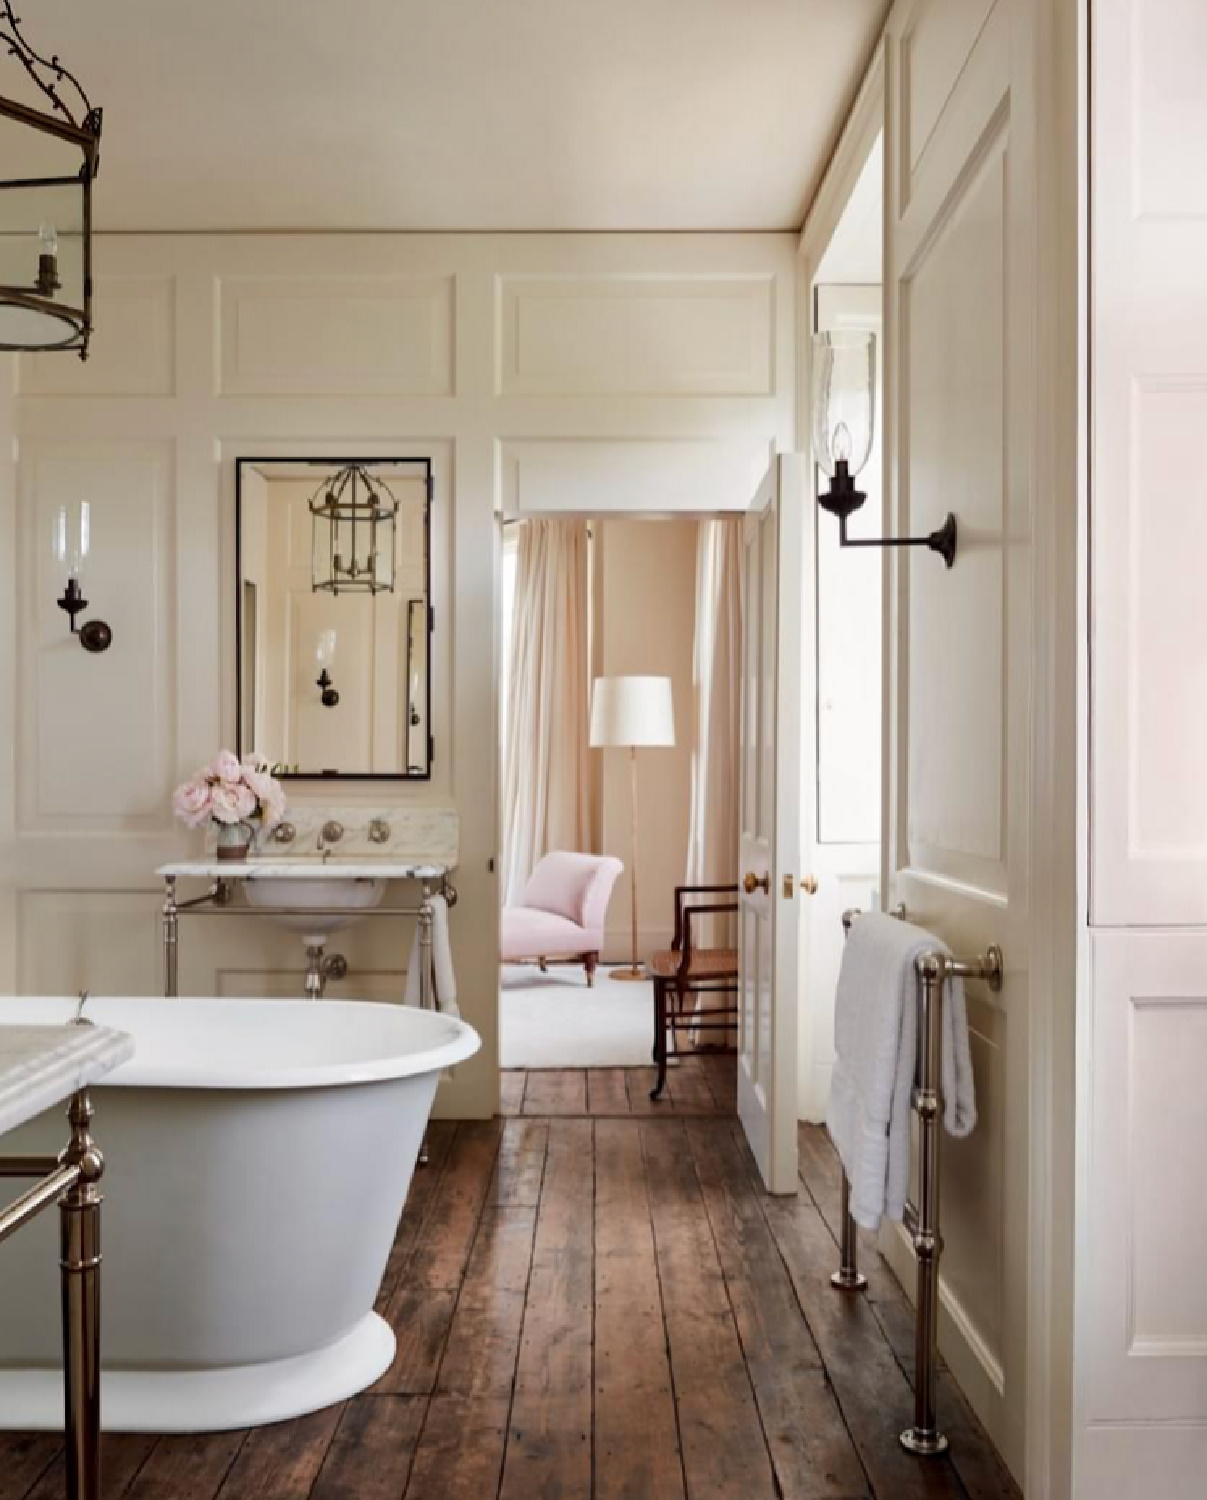 Timeless elegance in a classic bath with wood floors and design by Rose Uniacke. #timelessbathroom #roseuniacke #englishcountry #europeancountry